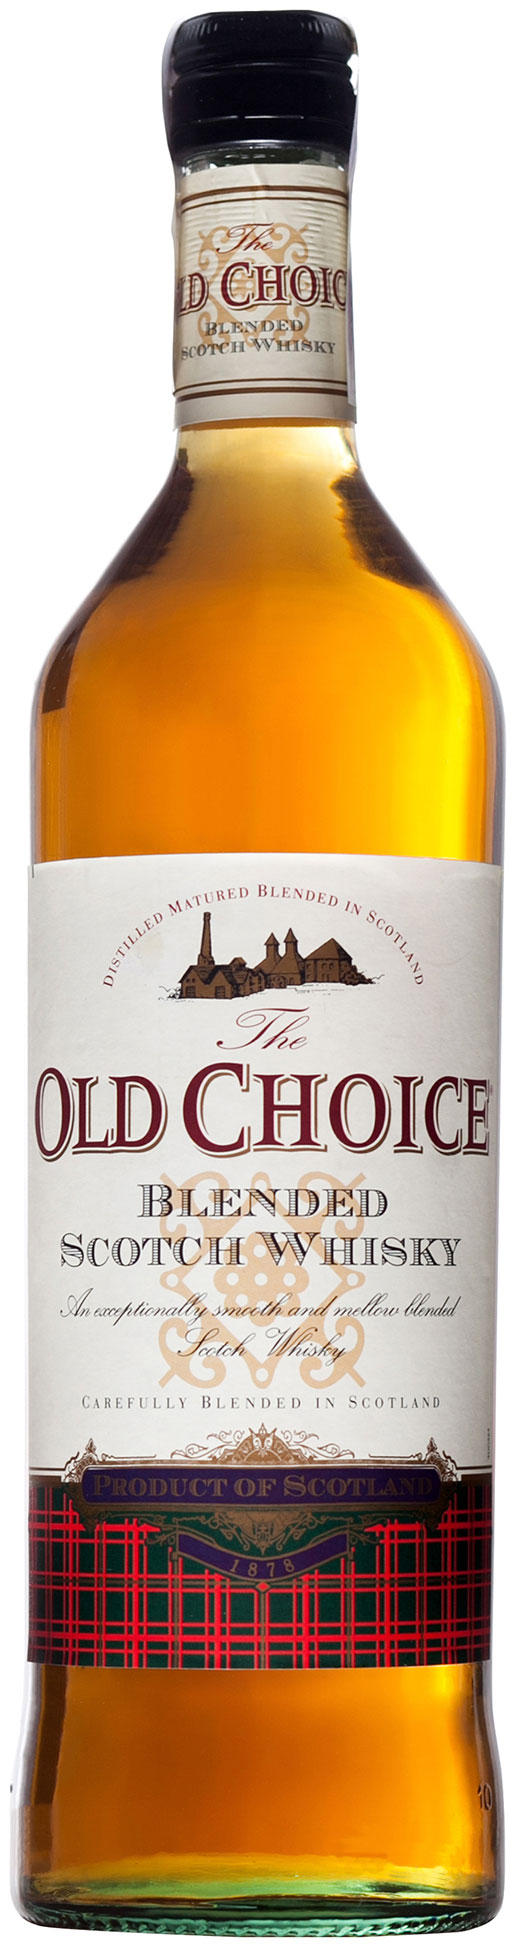 Dilmoor Old Choice 1 liter фото